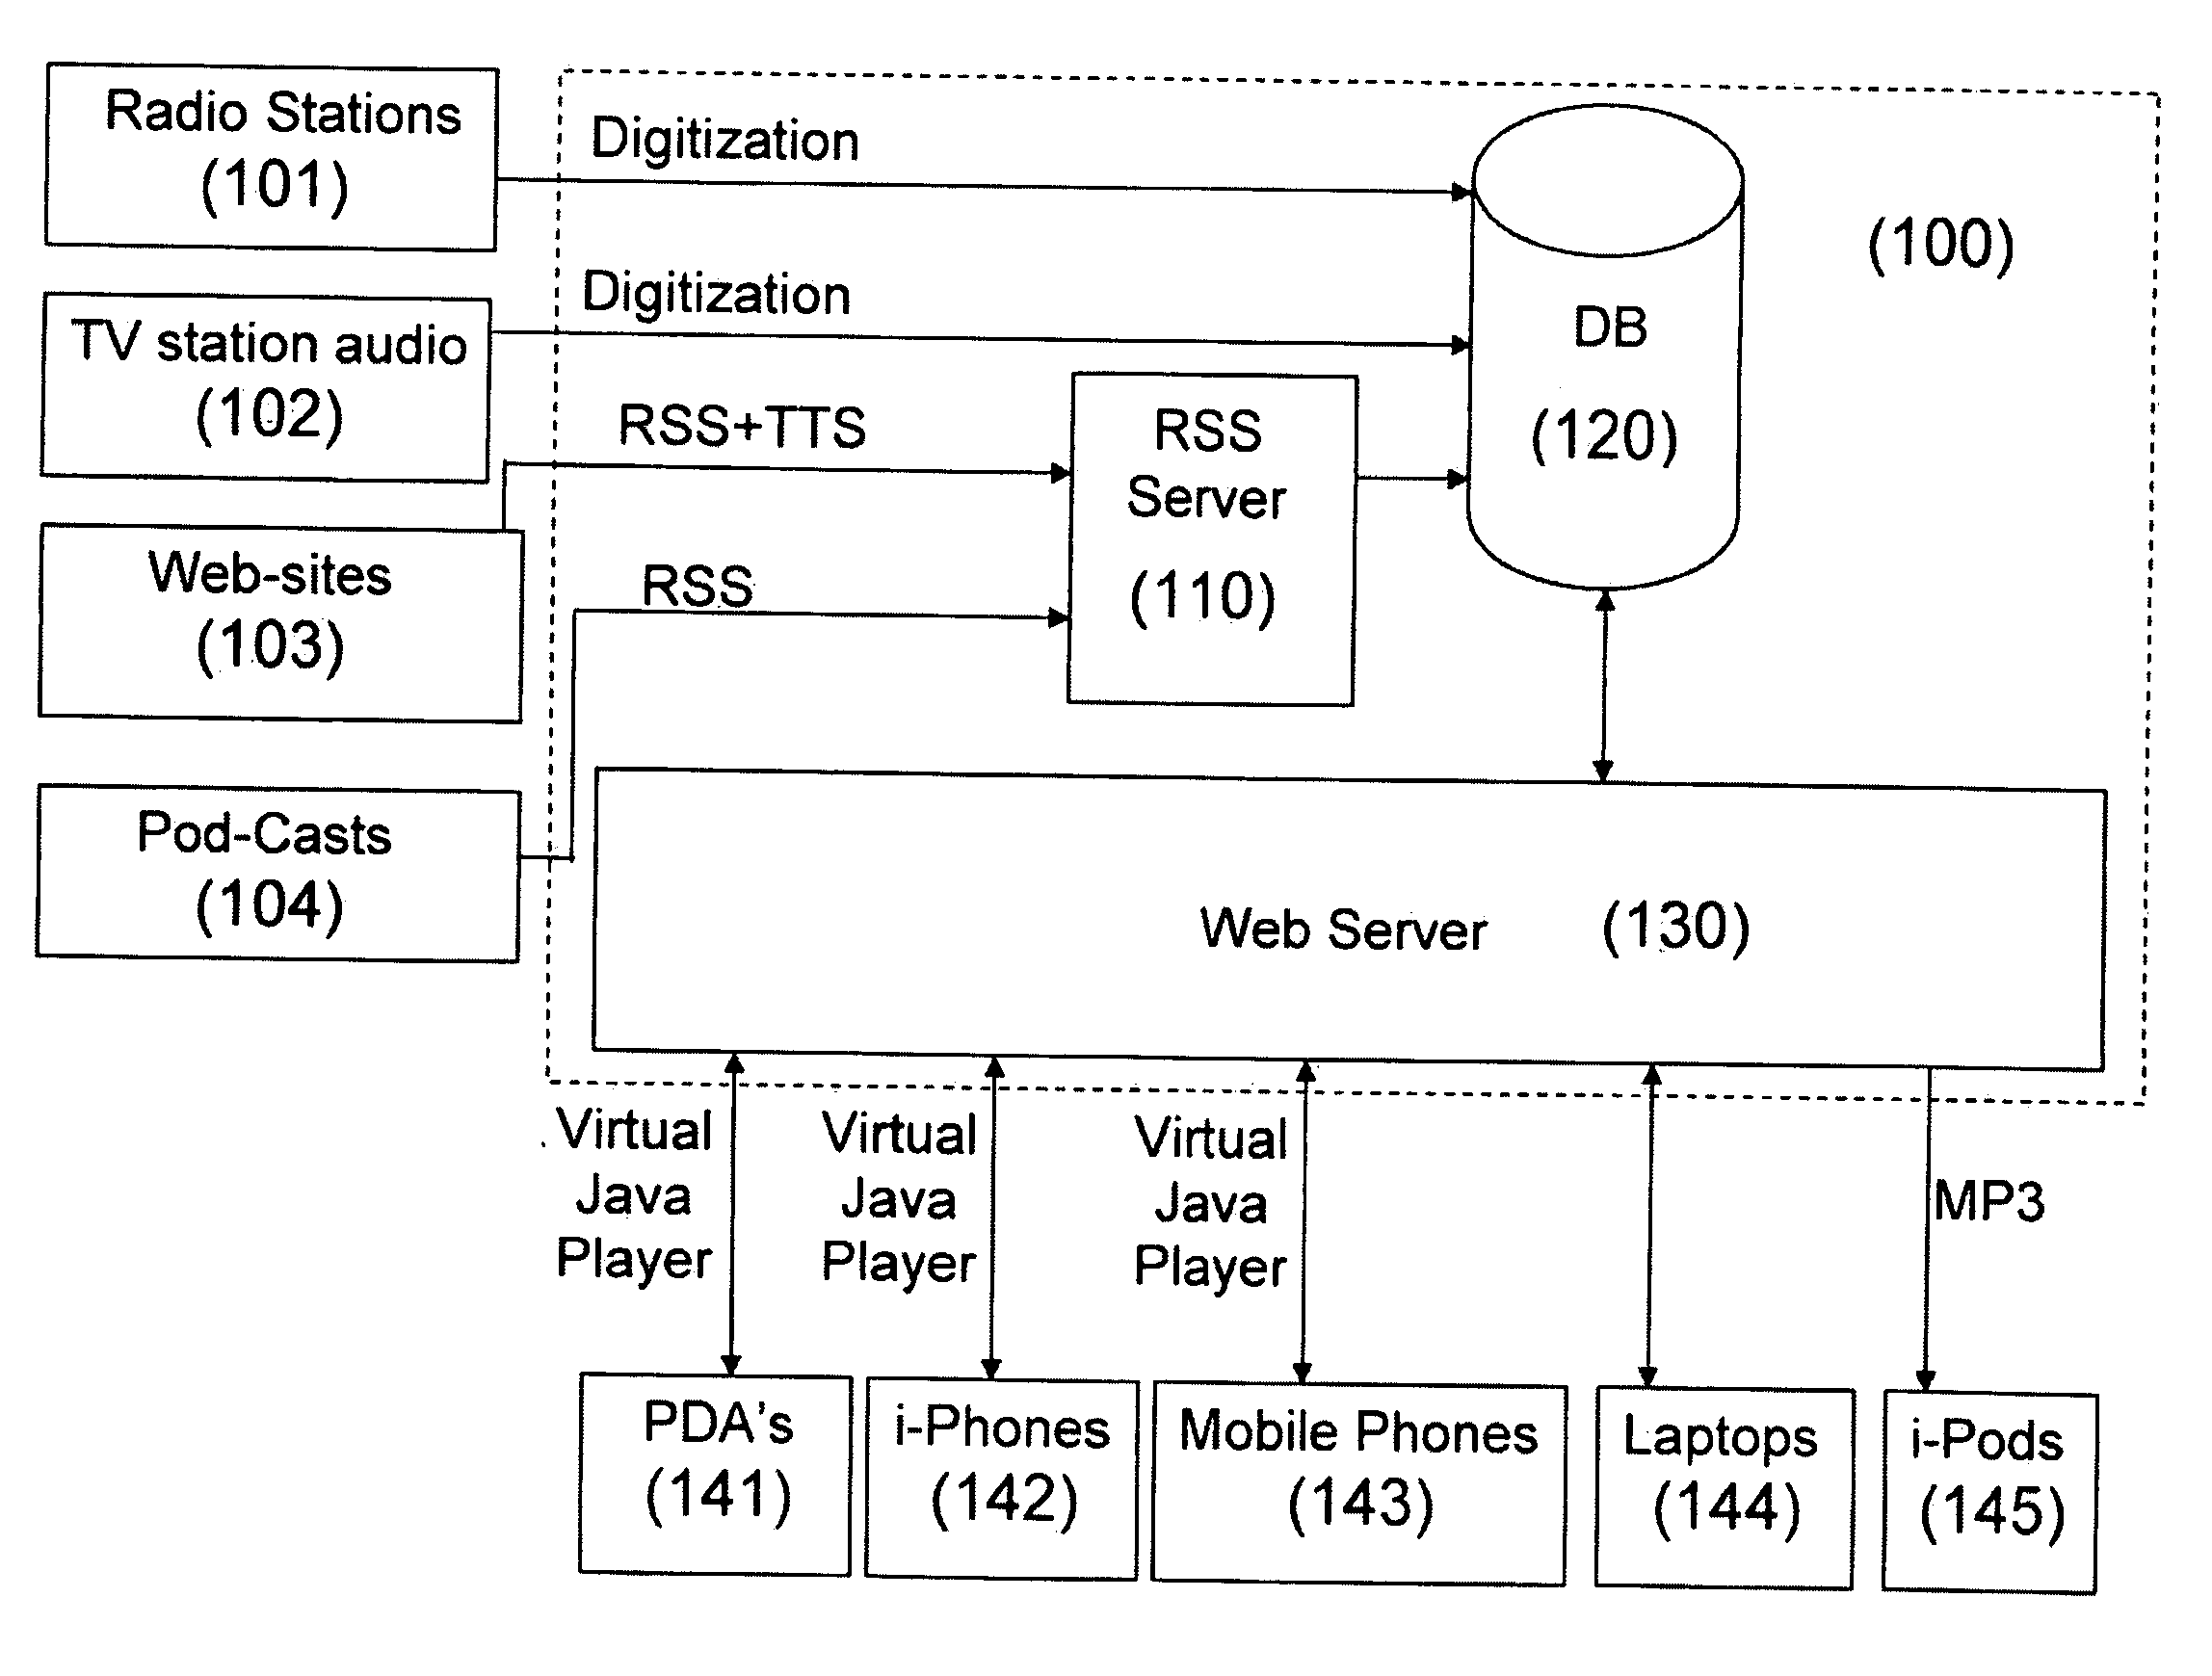 System and Method Providing Audio-on-Demand to a User's Personal Online Device as Part of an Online Audio Community